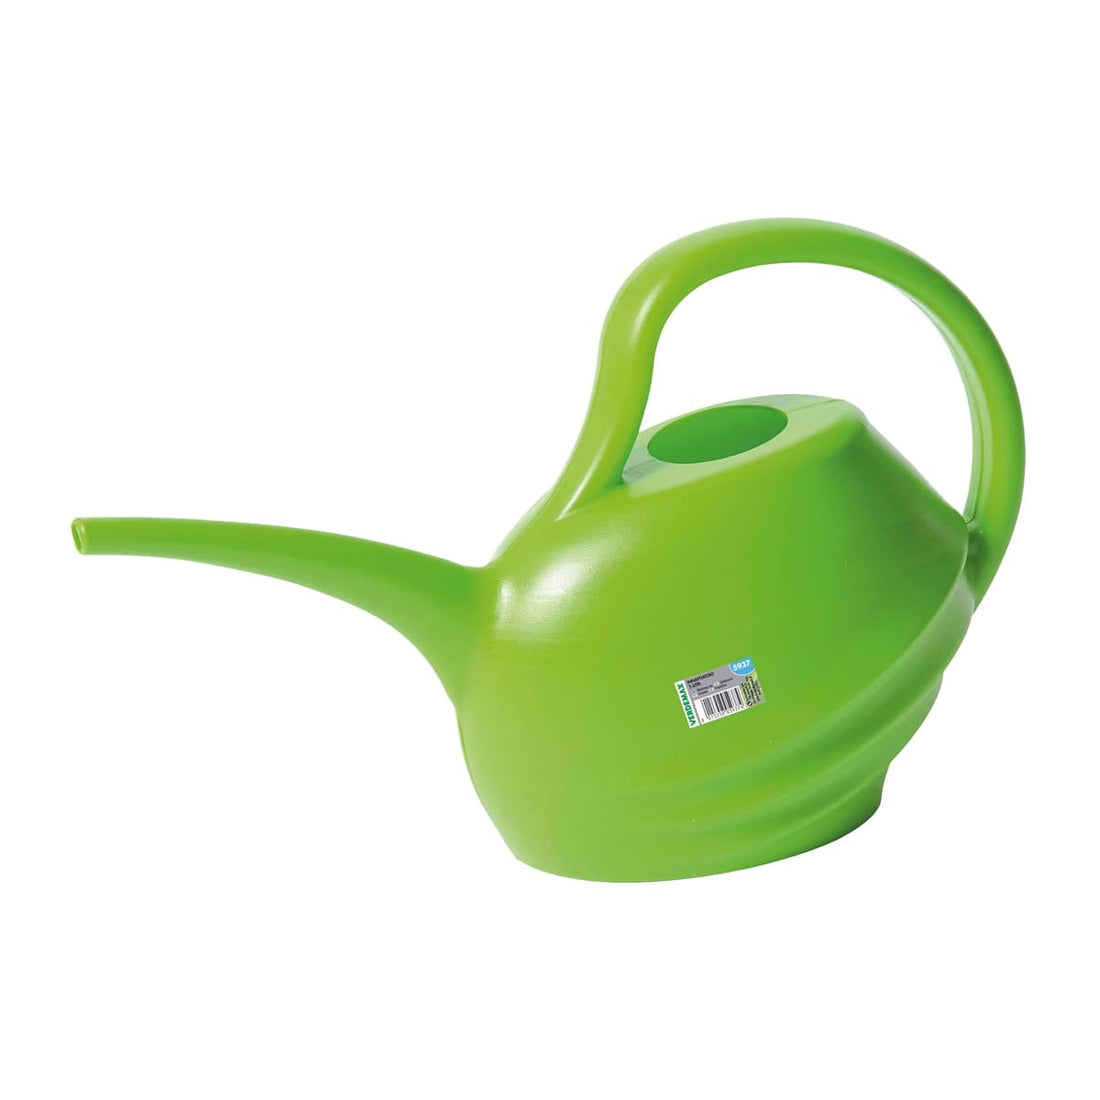 WATERING CAN 2LT - best price from Maltashopper.com BR500005959